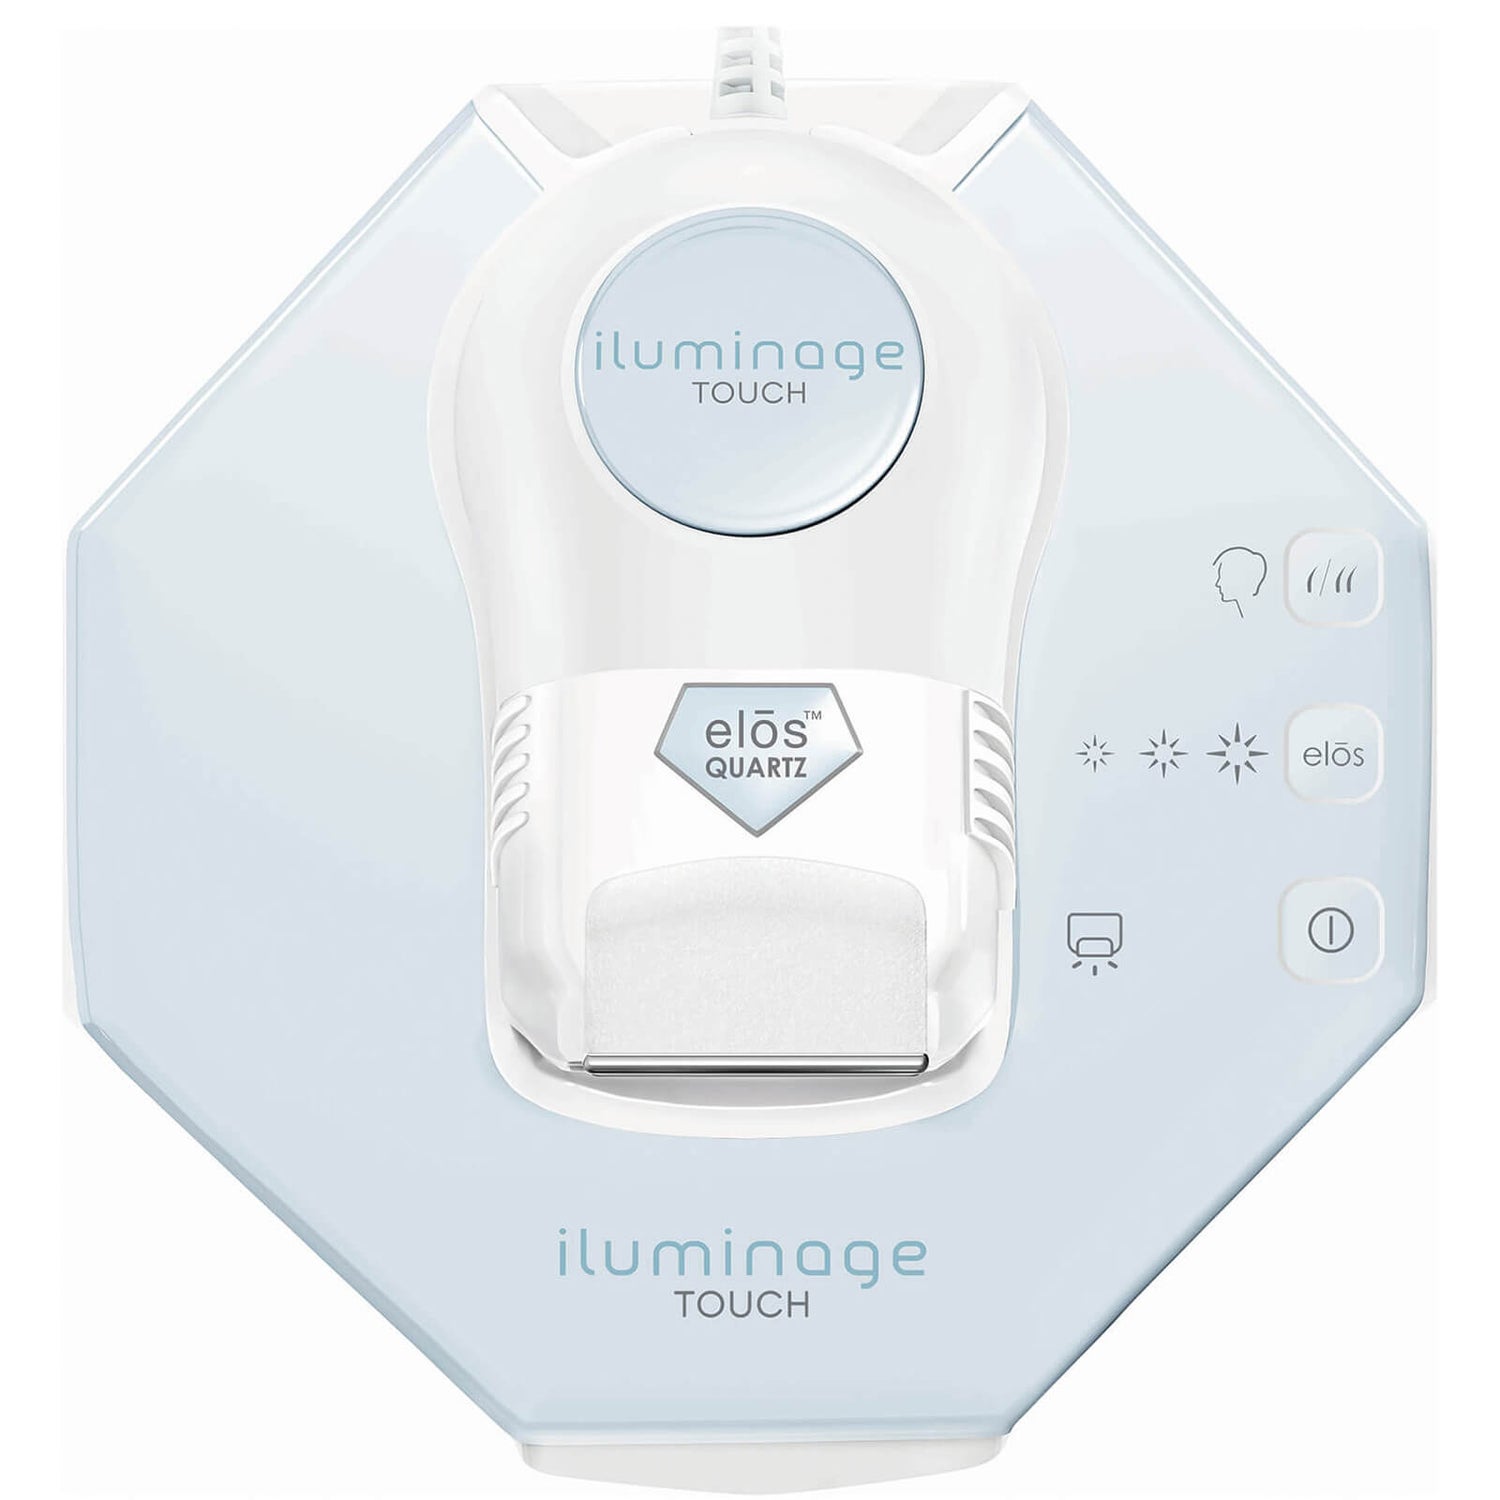 Iluminage TOUCH Permanent Hair Remover